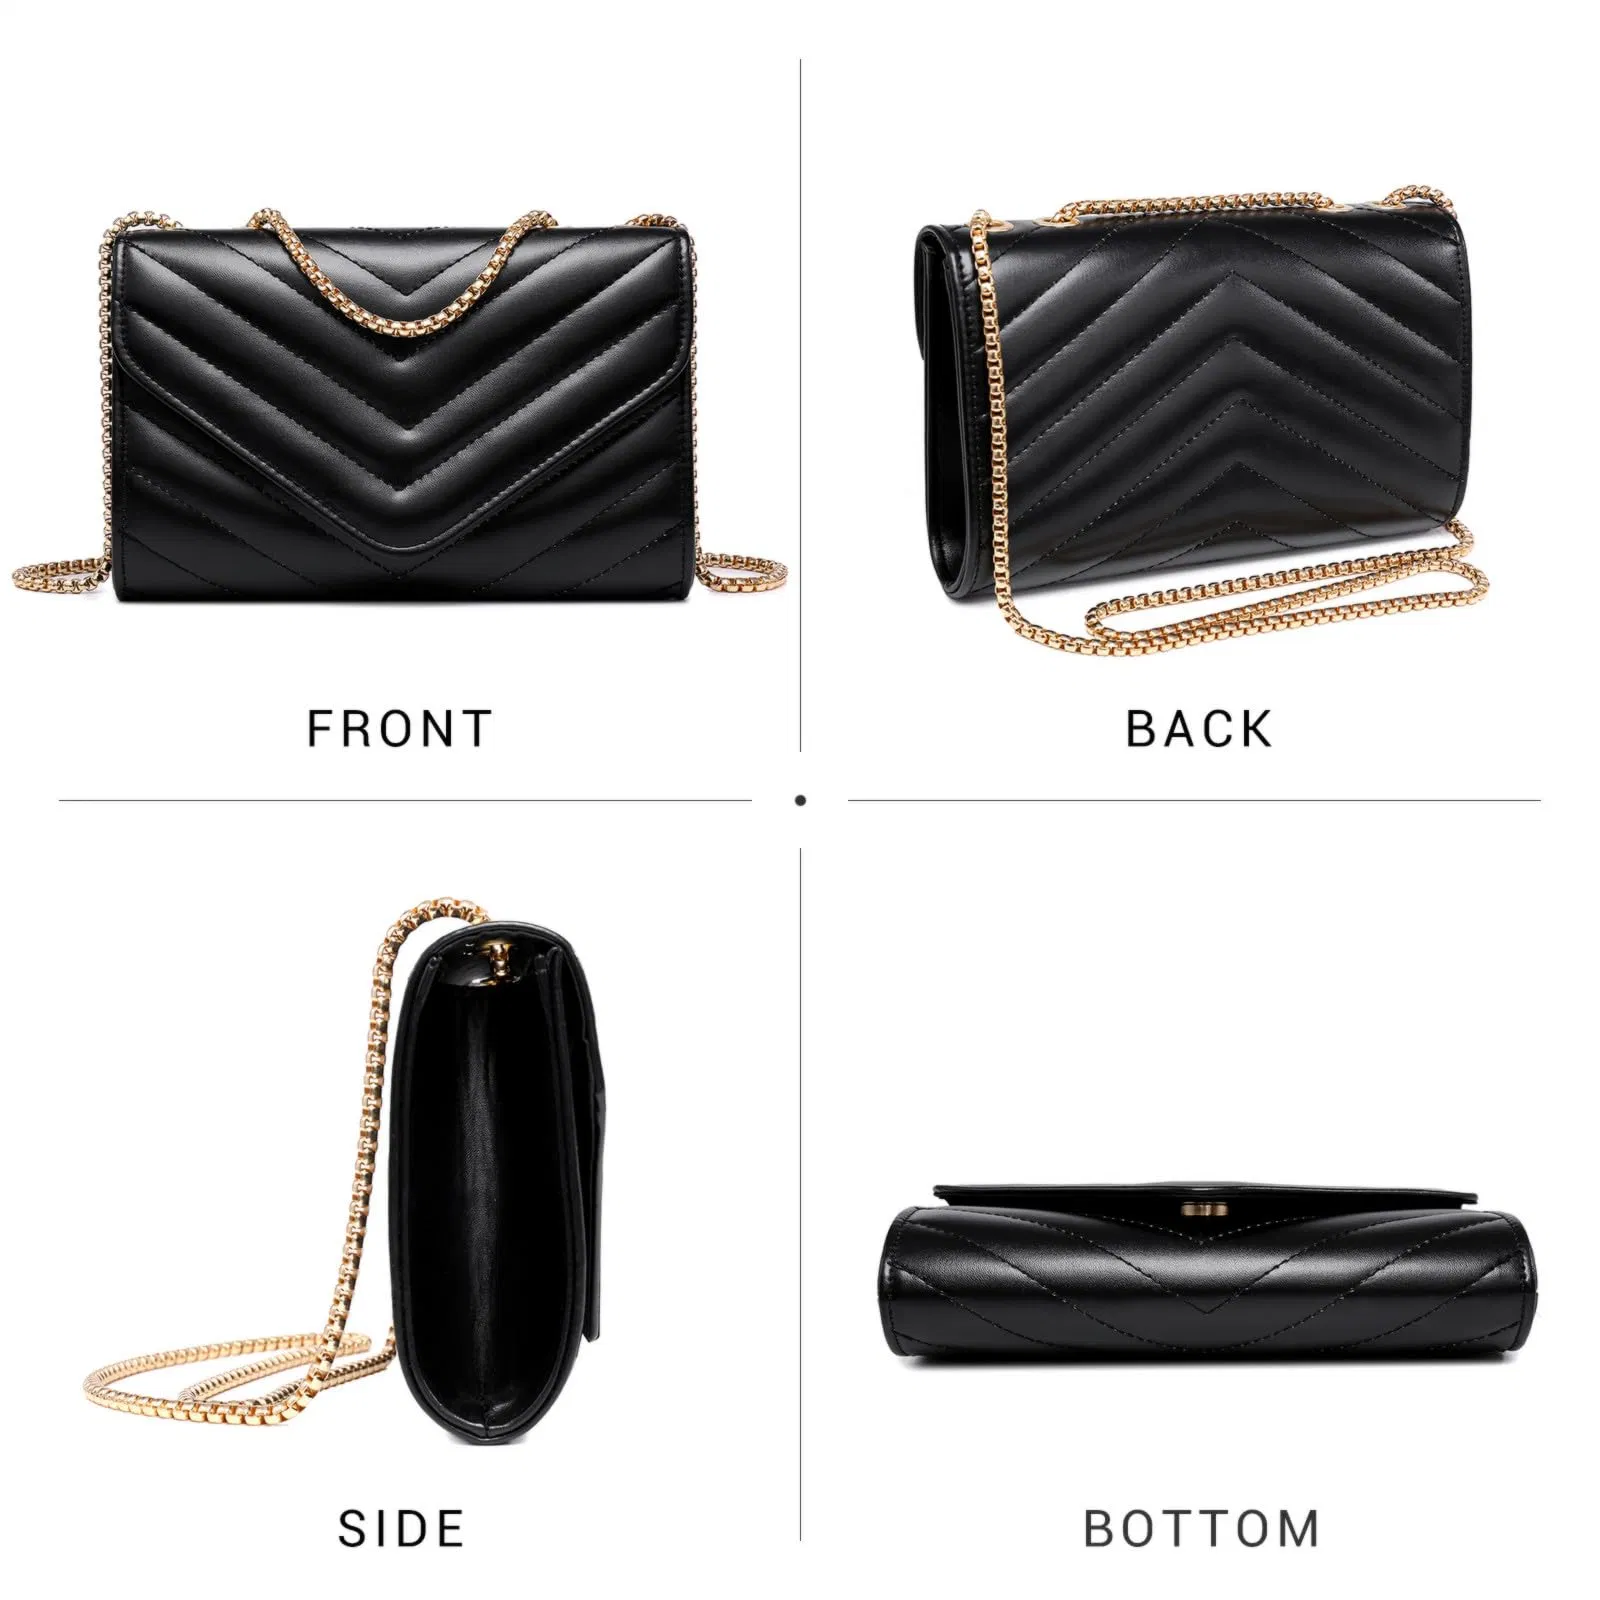 Fashion Ladies Small Quilted Crossbody Bags Stylish Designer Evening Bag Clutch Purses and Handbags with Chain Shoulder Strap